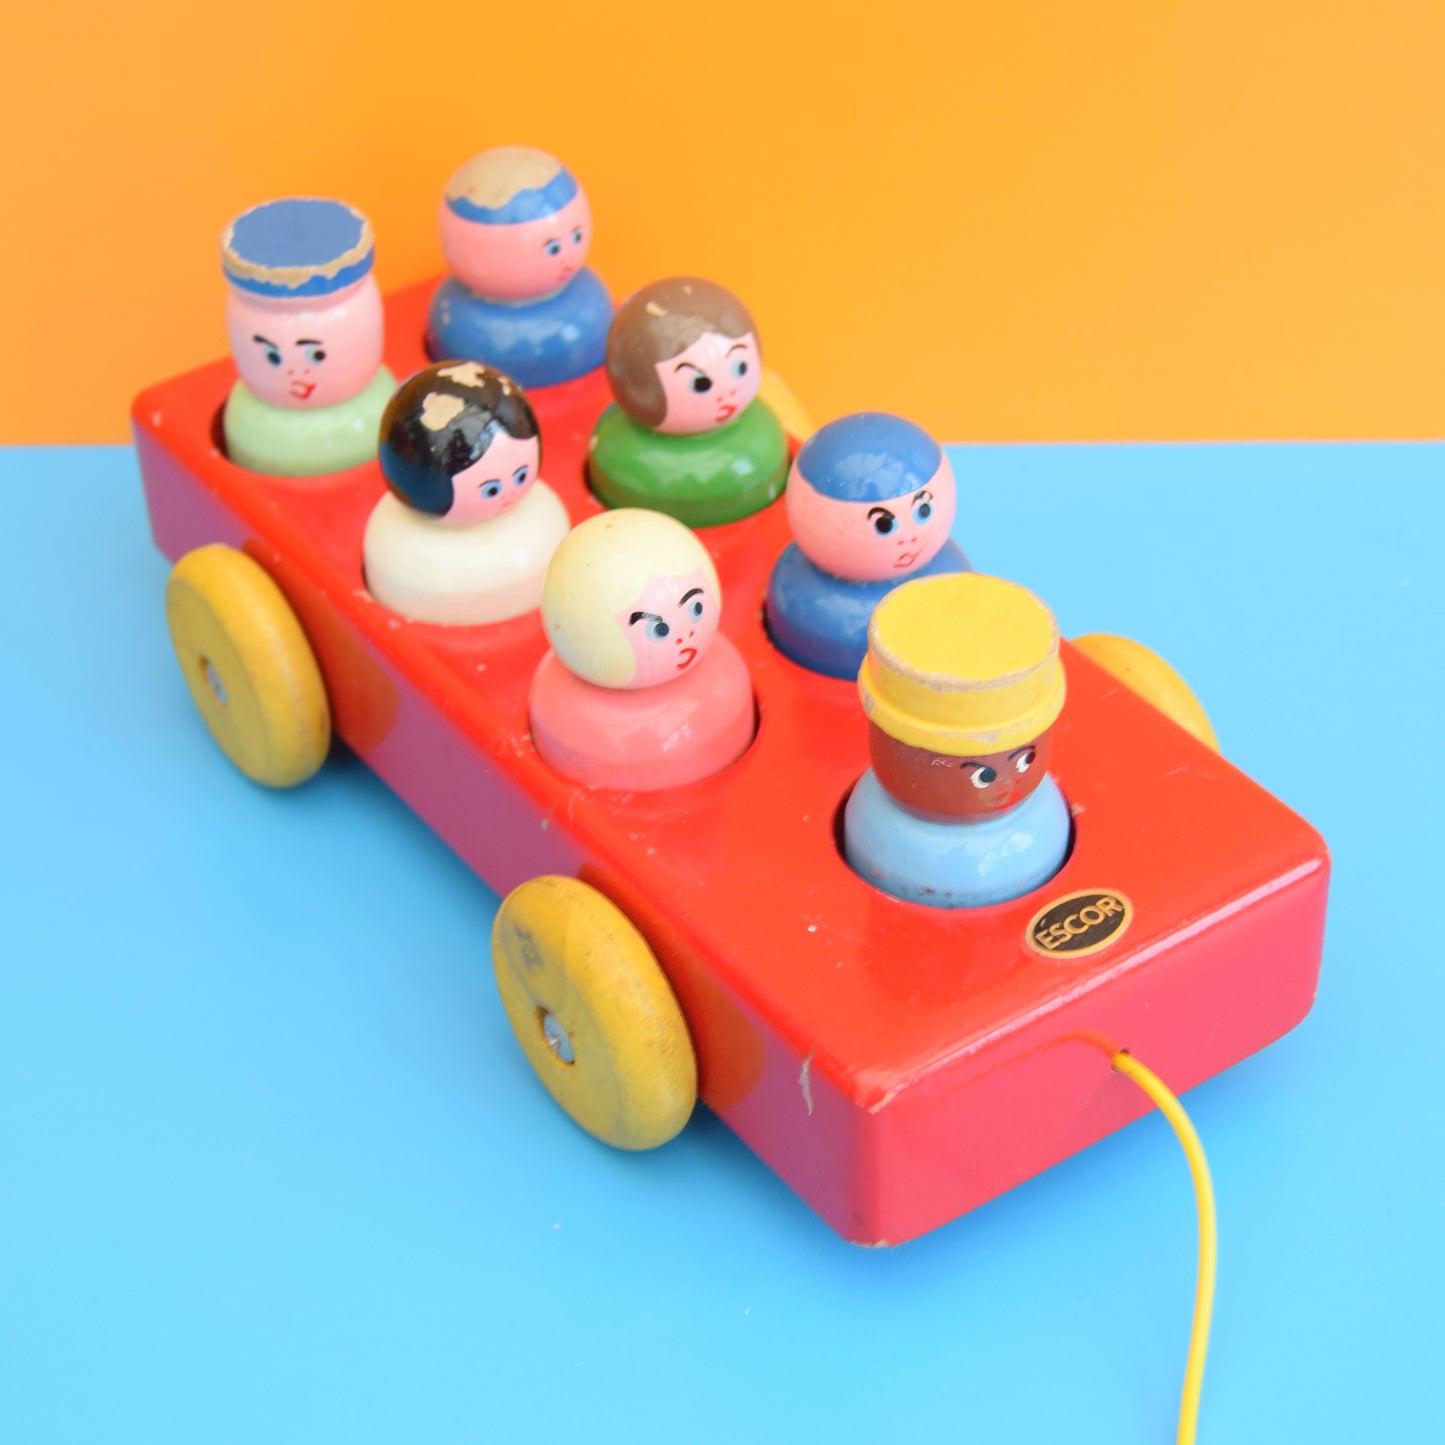 Vintage 1960s Wooden Car Toy With People - Escor